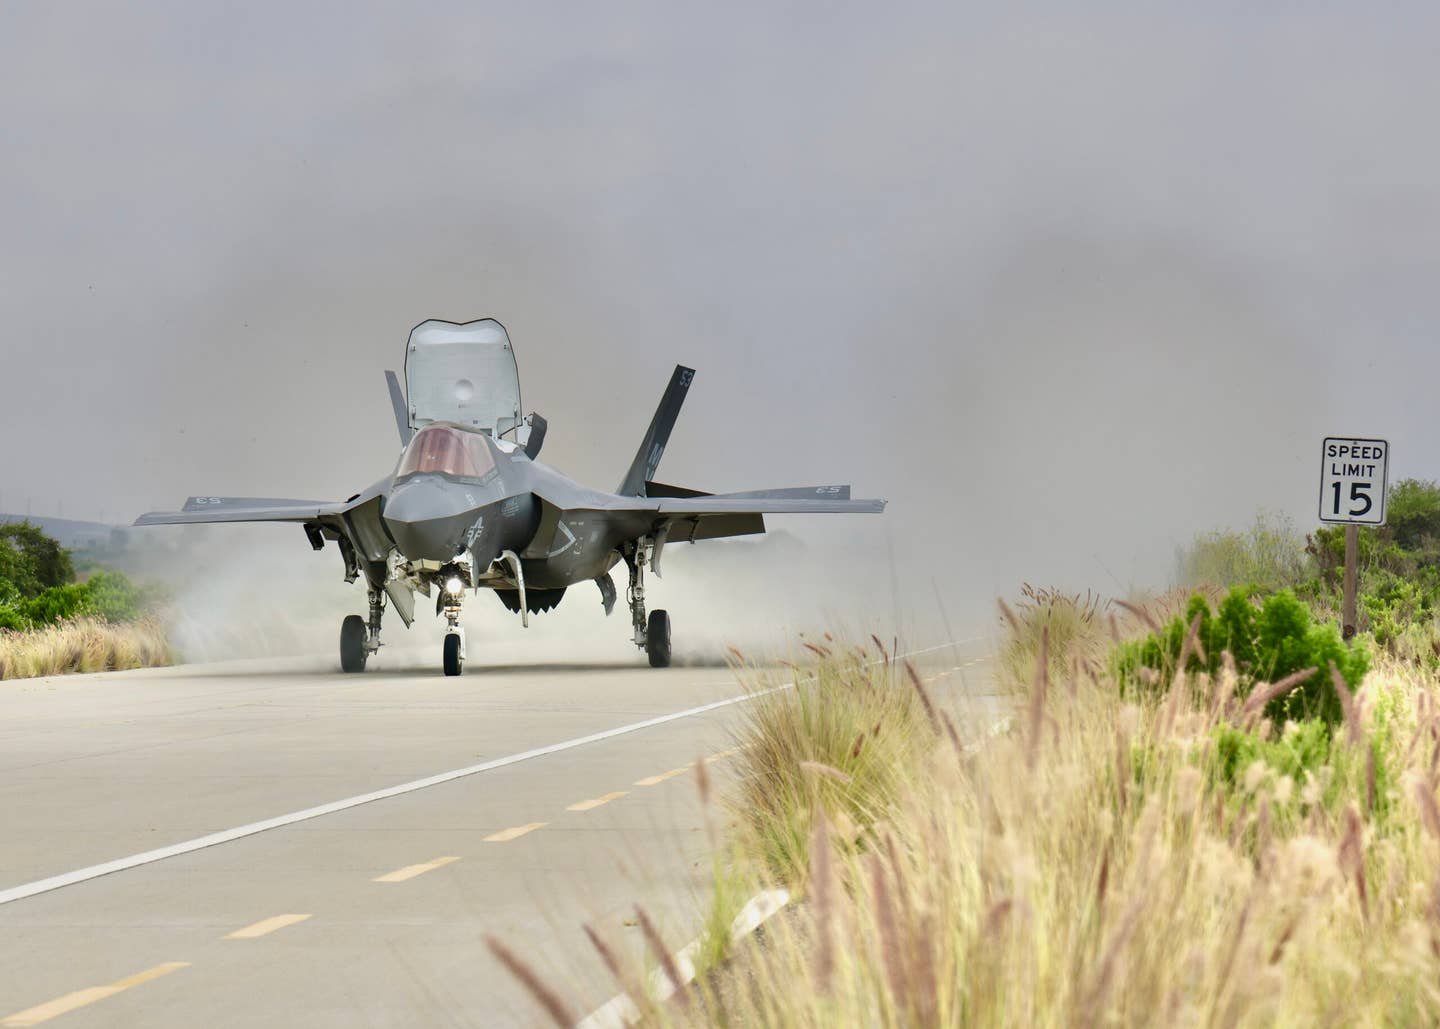 VMX-1 F-35B rolling out on the highway. (James Deboer)